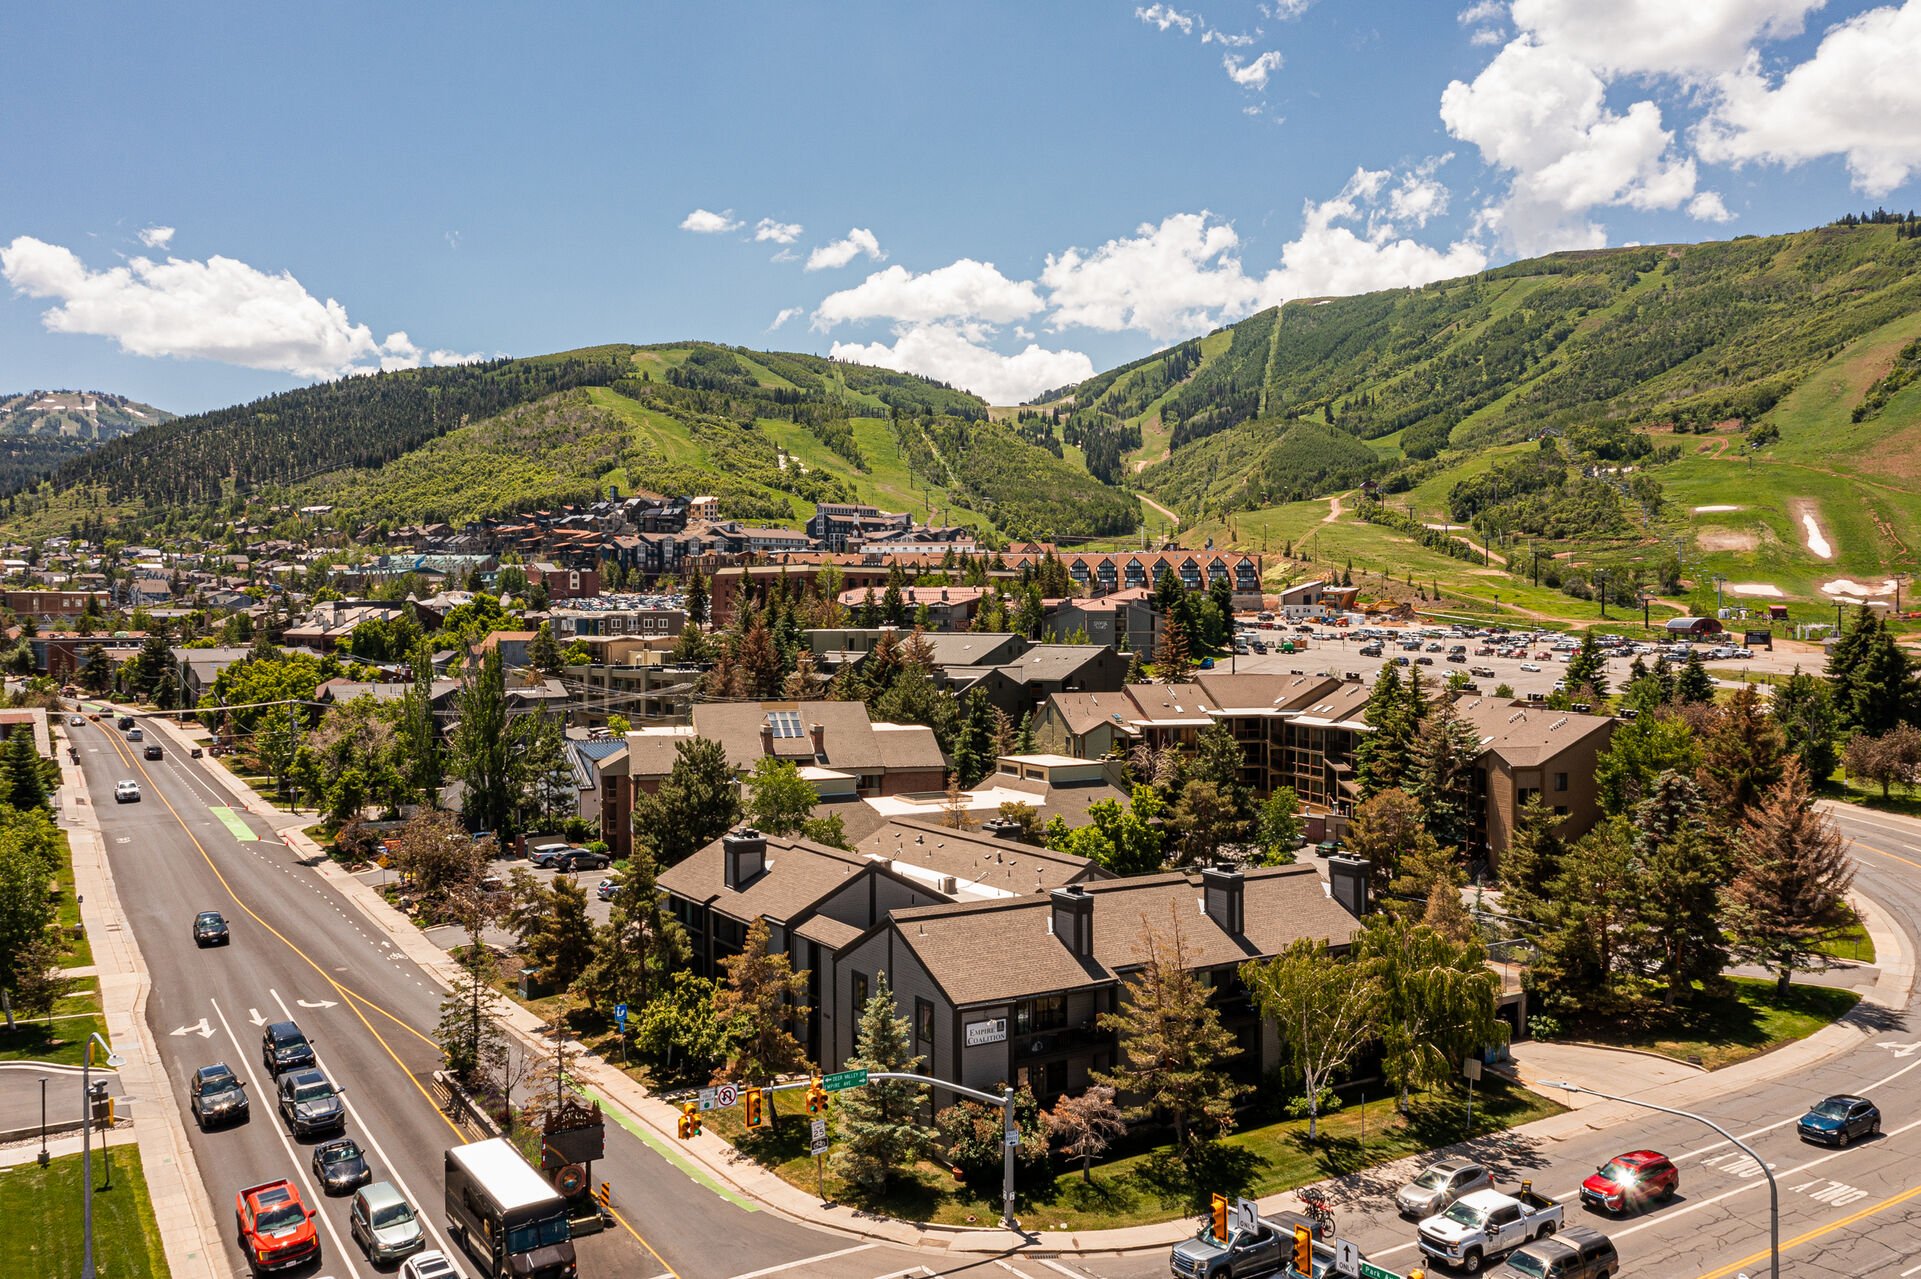 Park City Mountain Resort (and more!) only minutes away